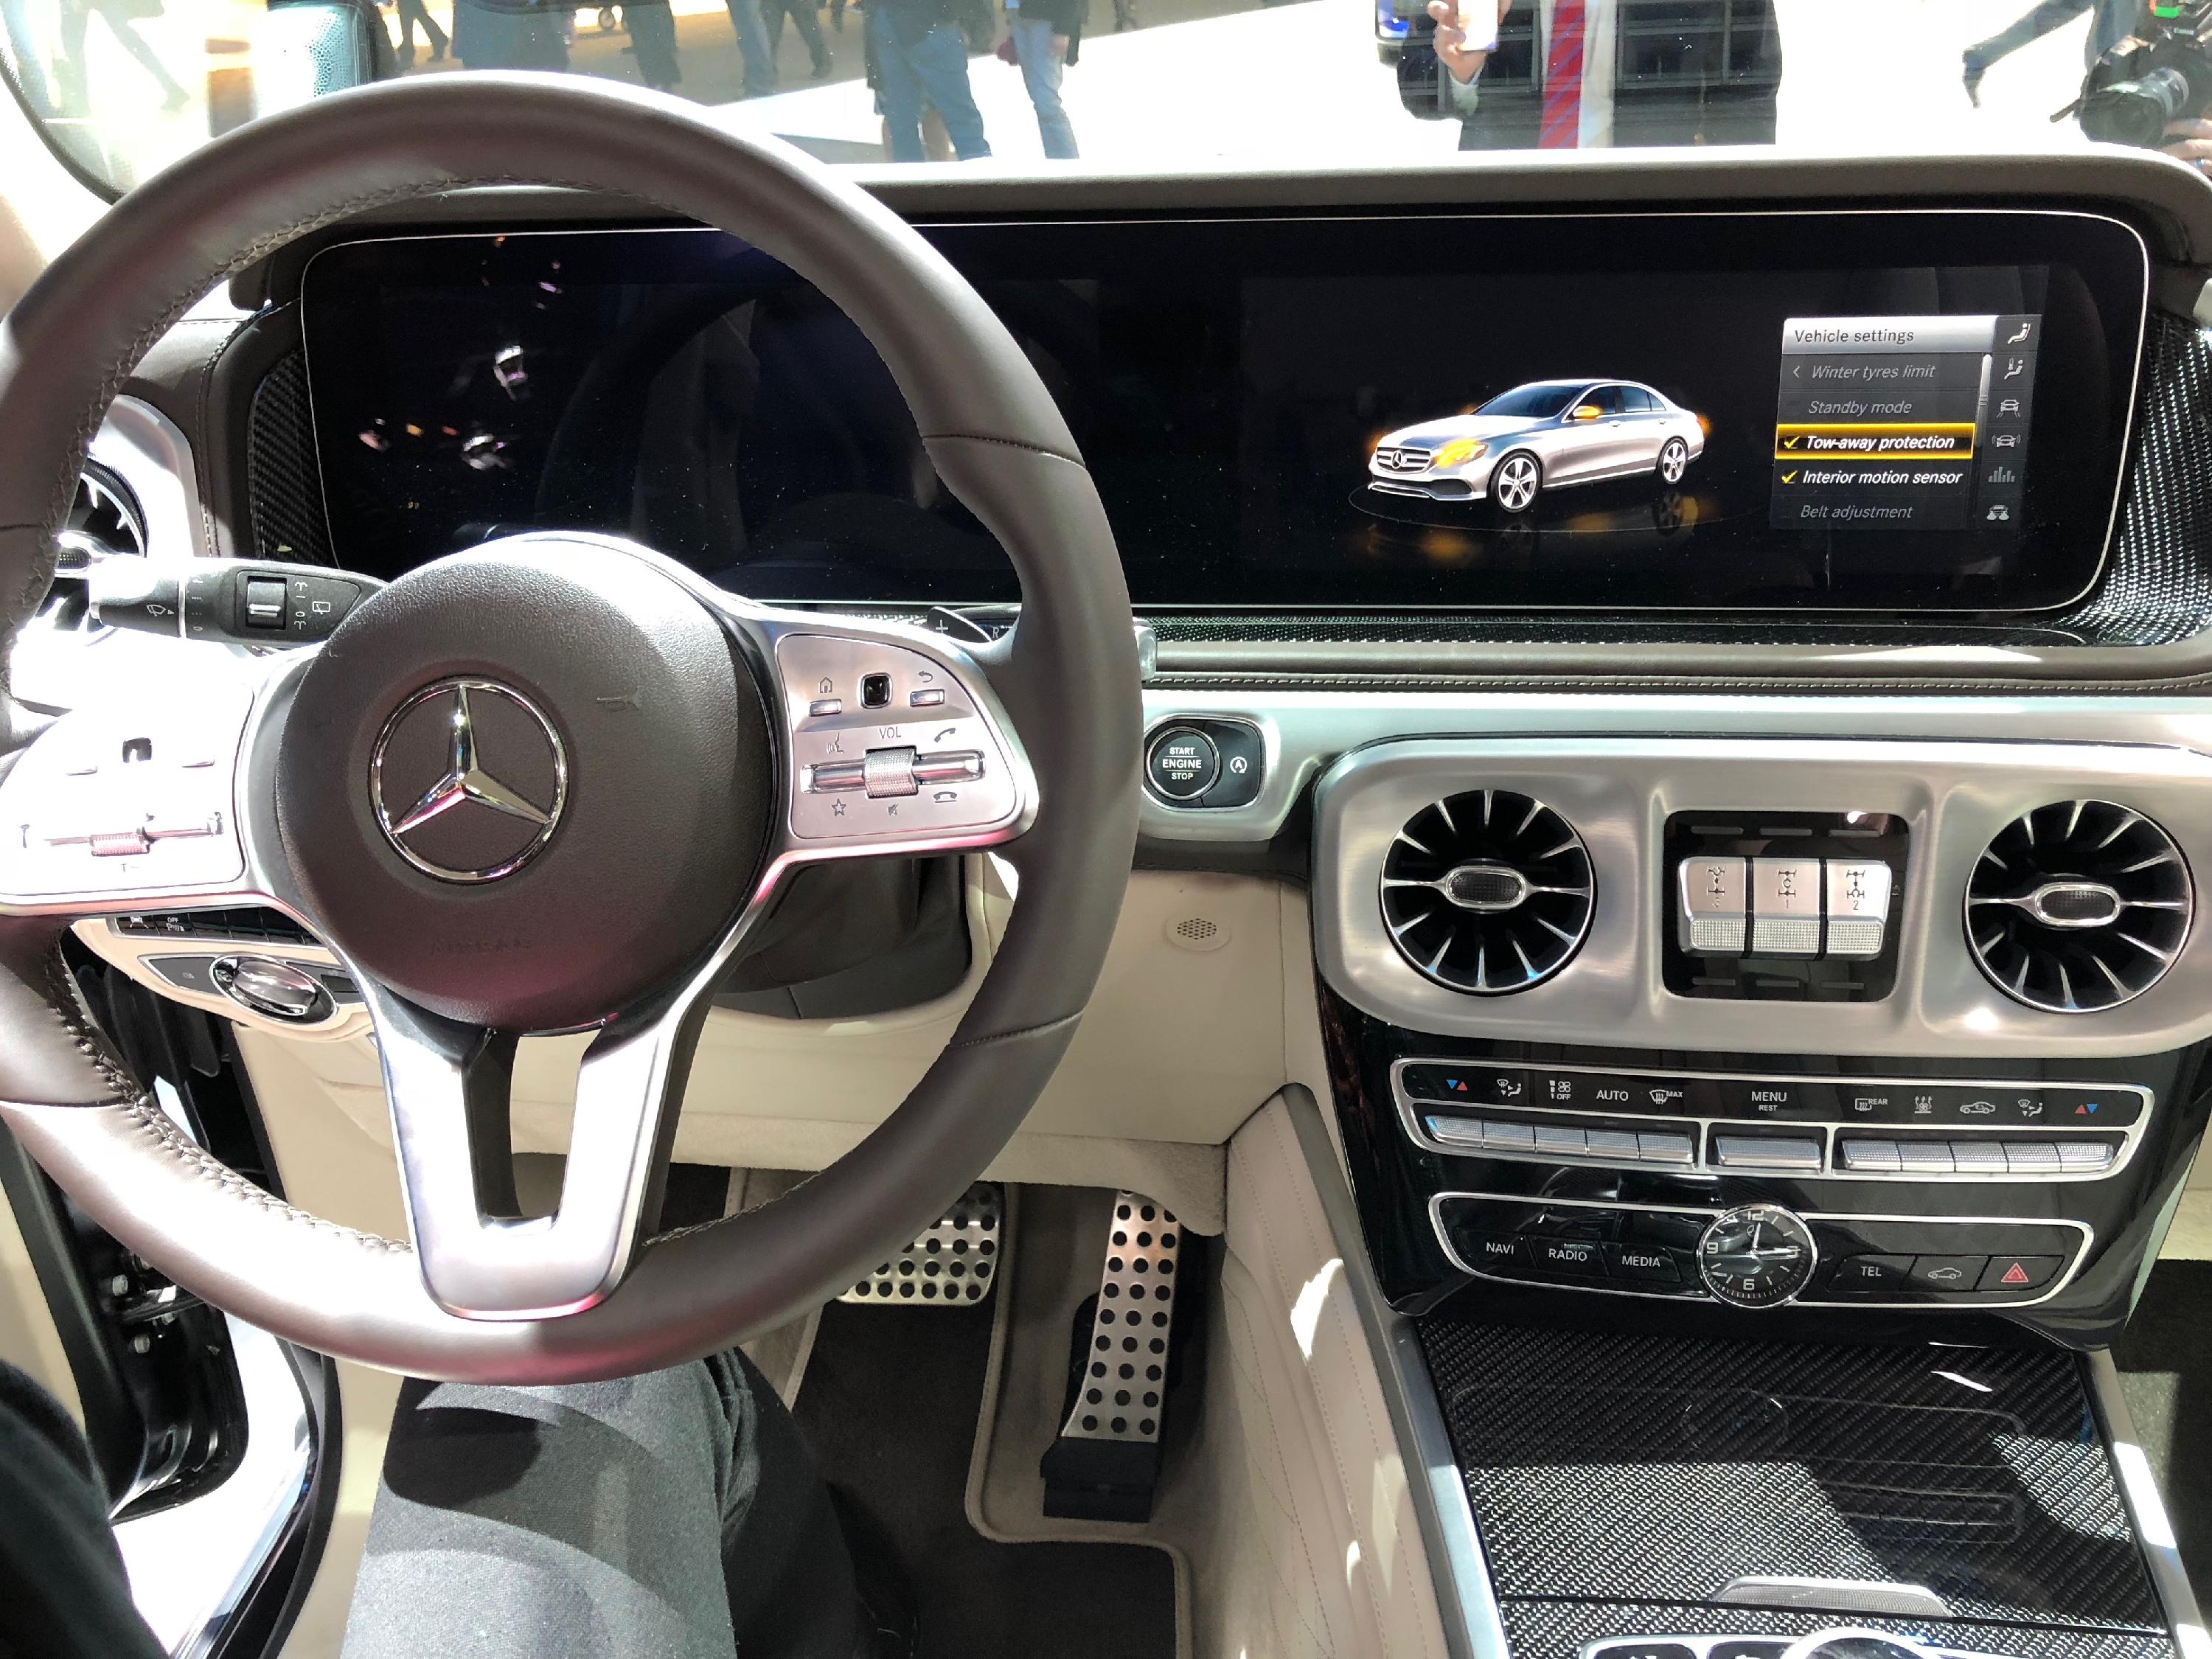 Mercedes G Wagon 2019 Price Used 2019 Mercedes 2019 10 31